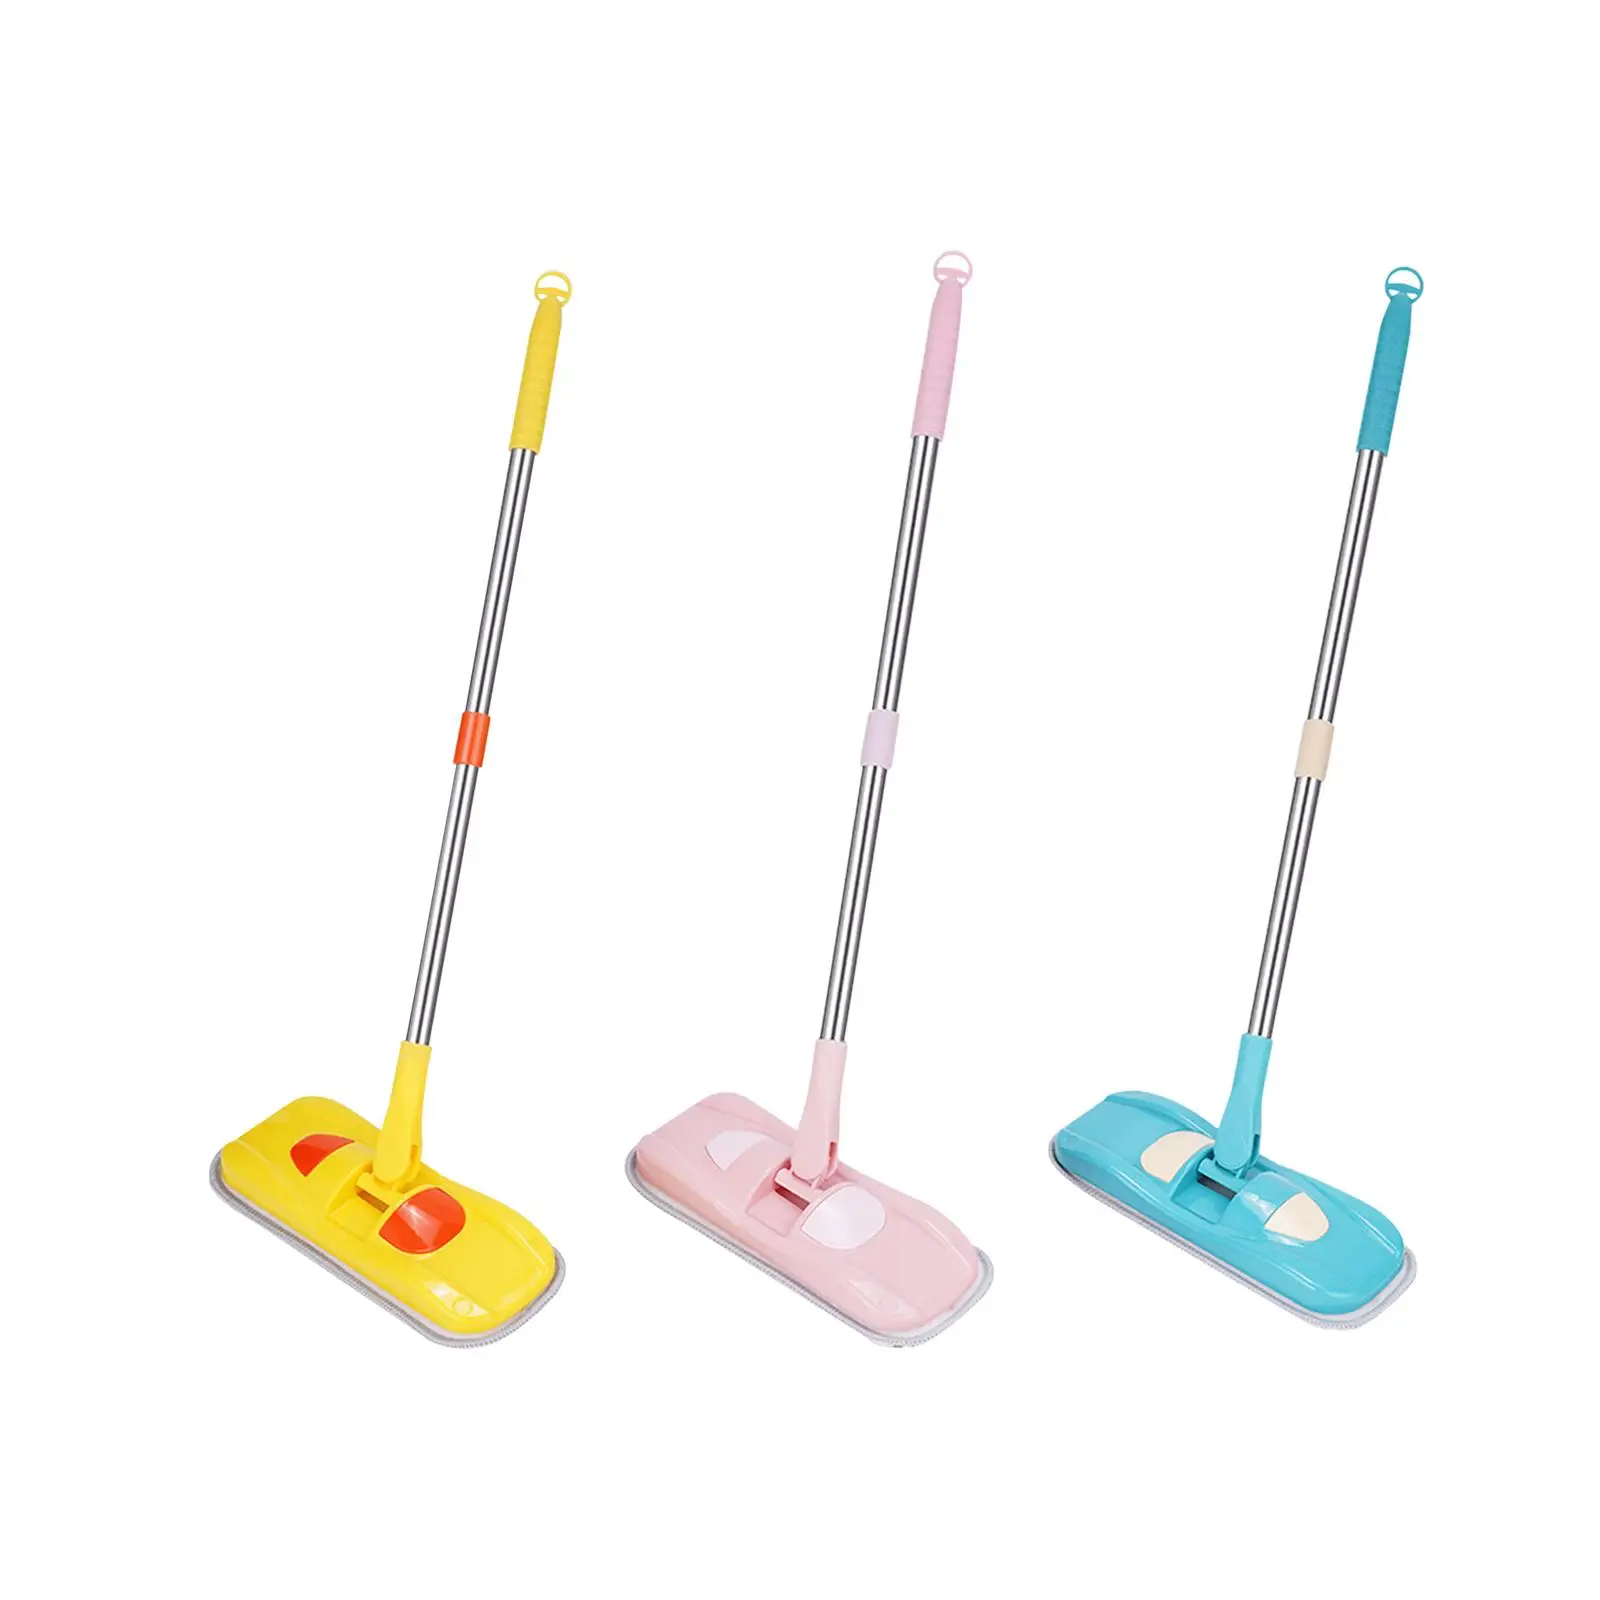 Miniature Mopping House Tool Playhouse Toy Educational Cool Car Theme Mini Kids Mop for Preschool Kindergarten Age 3-6 Years